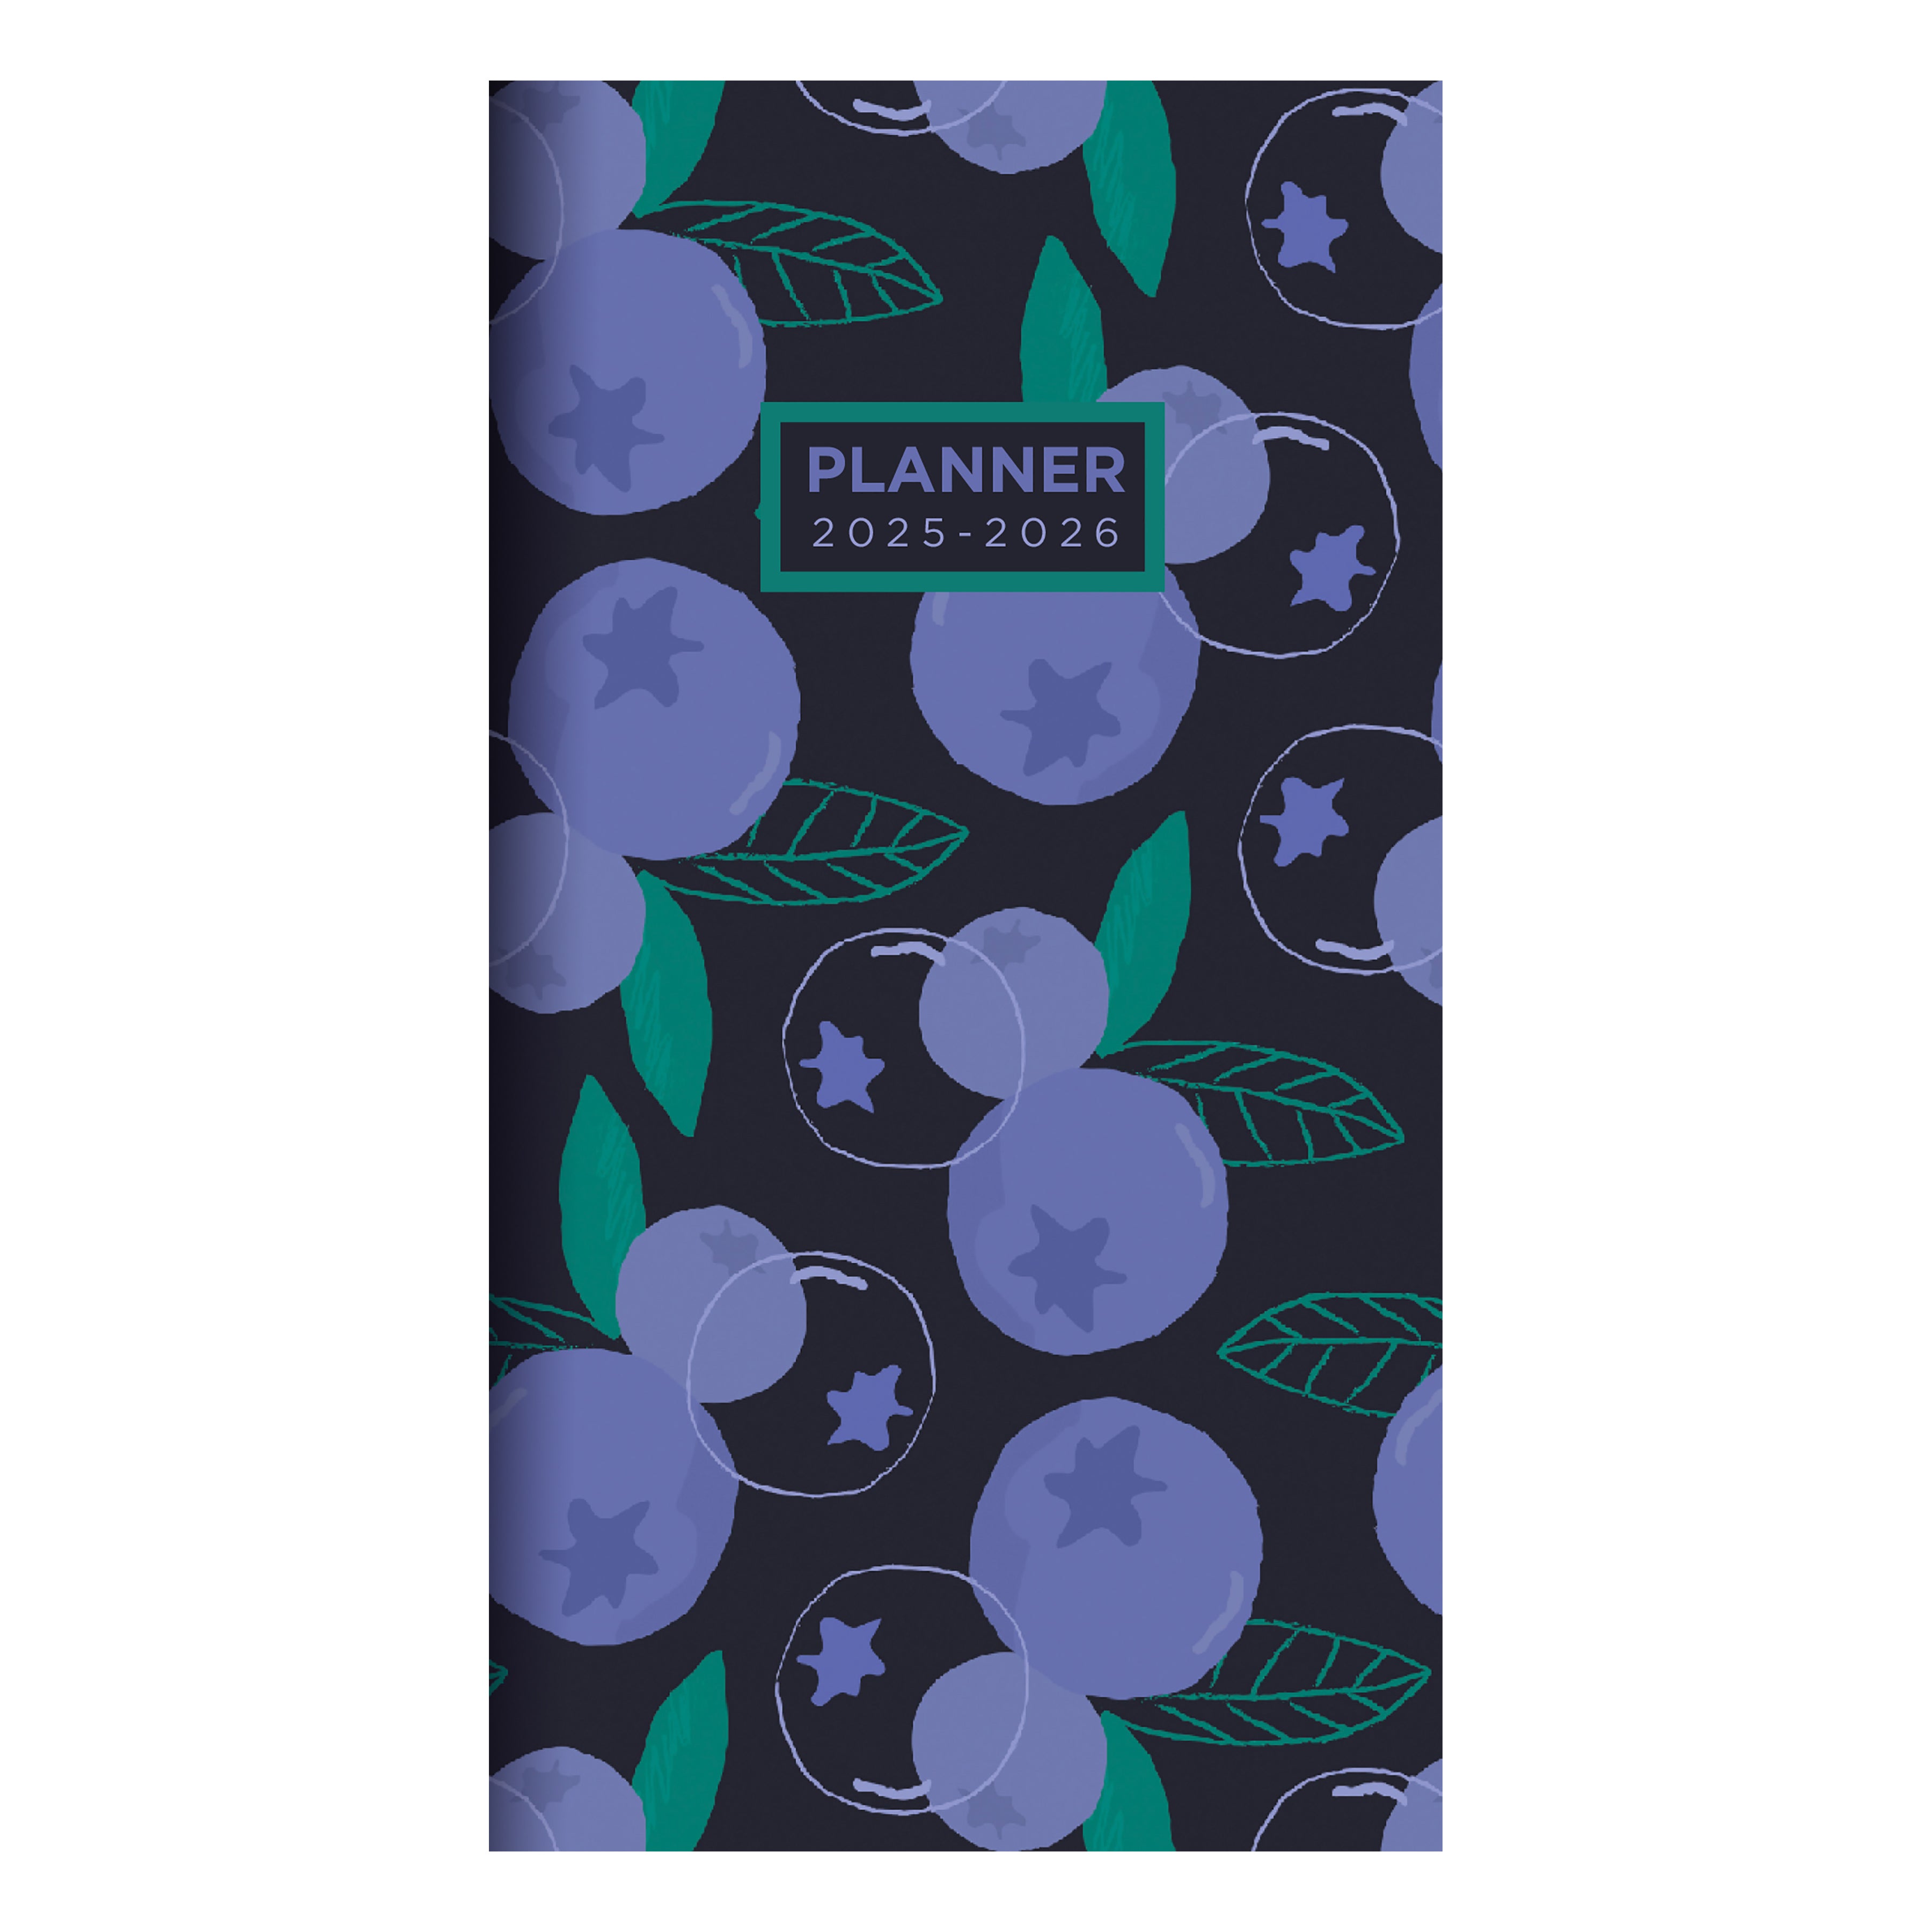 2025-2026 Blueberry - Small Monthly Pocket Diary/Planner